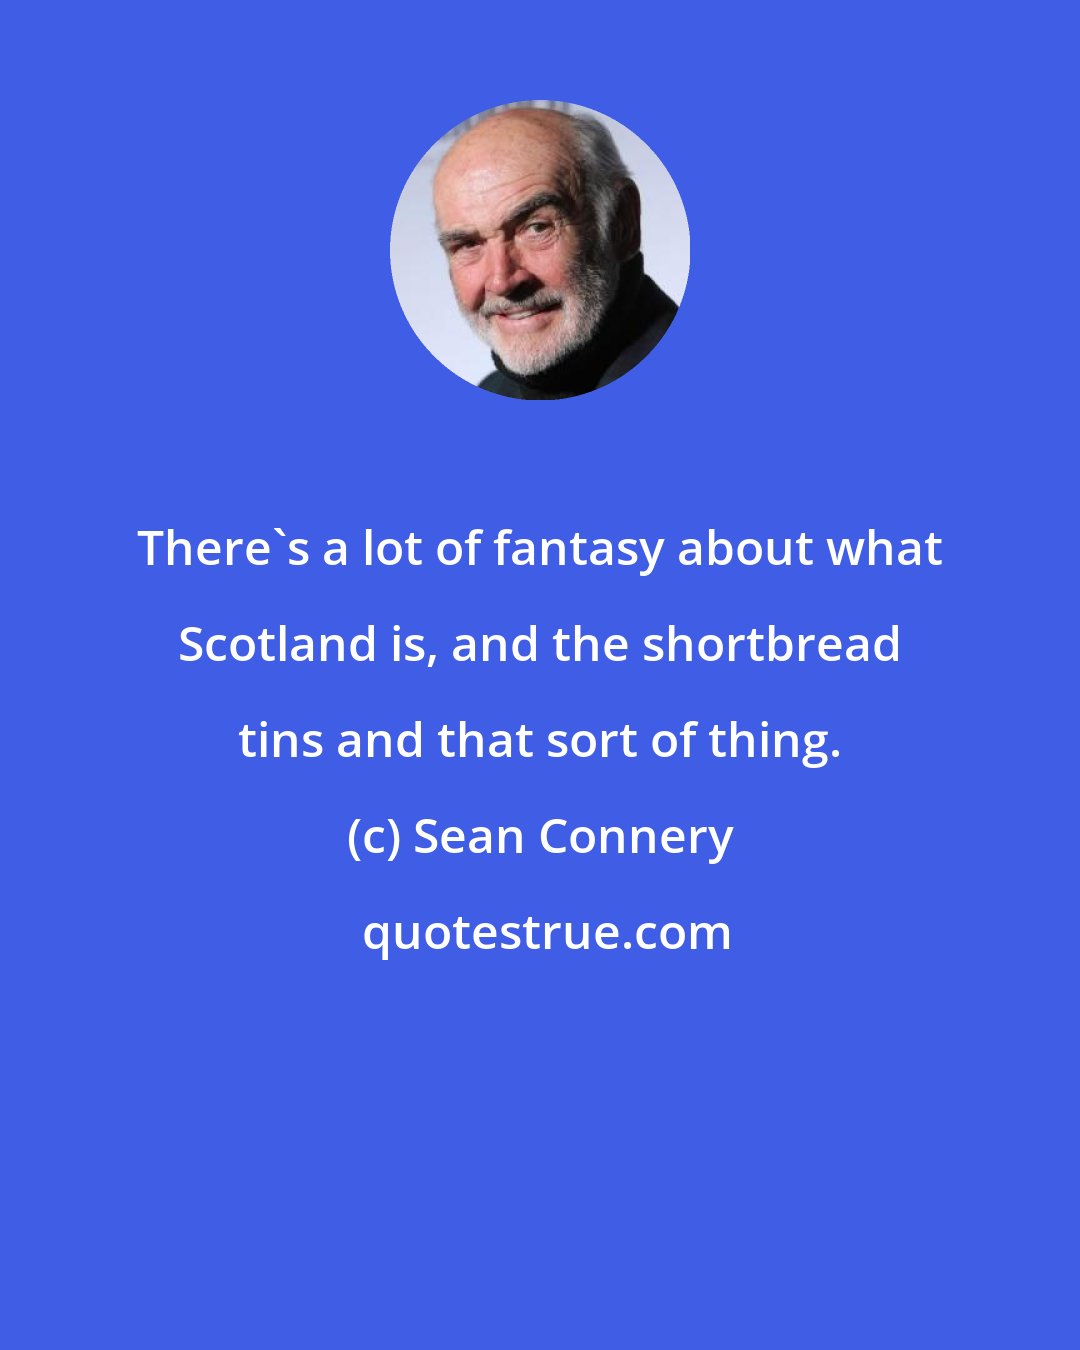 Sean Connery: There's a lot of fantasy about what Scotland is, and the shortbread tins and that sort of thing.